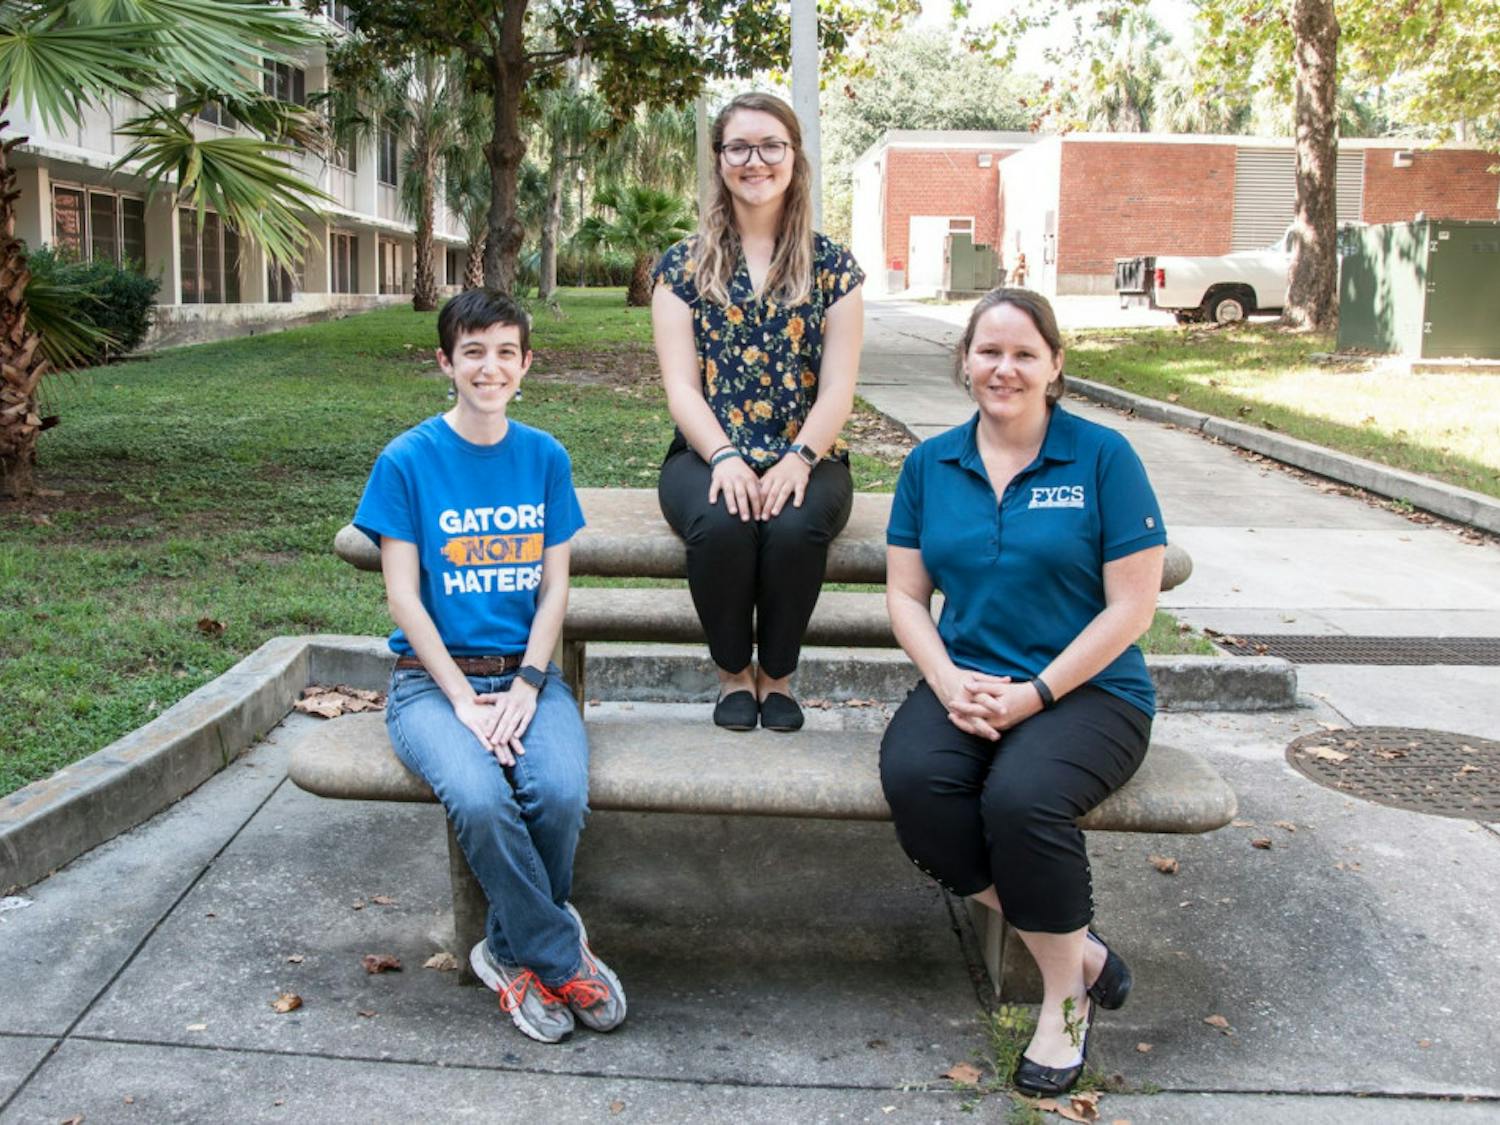 Elaine Giles (left), assistant director for UF's Brown Center for Leadership and Service, Emily Carroll (middle), former UF student, and Jennifer Jones (right), UF assistant professor, made up the volunteering research team.